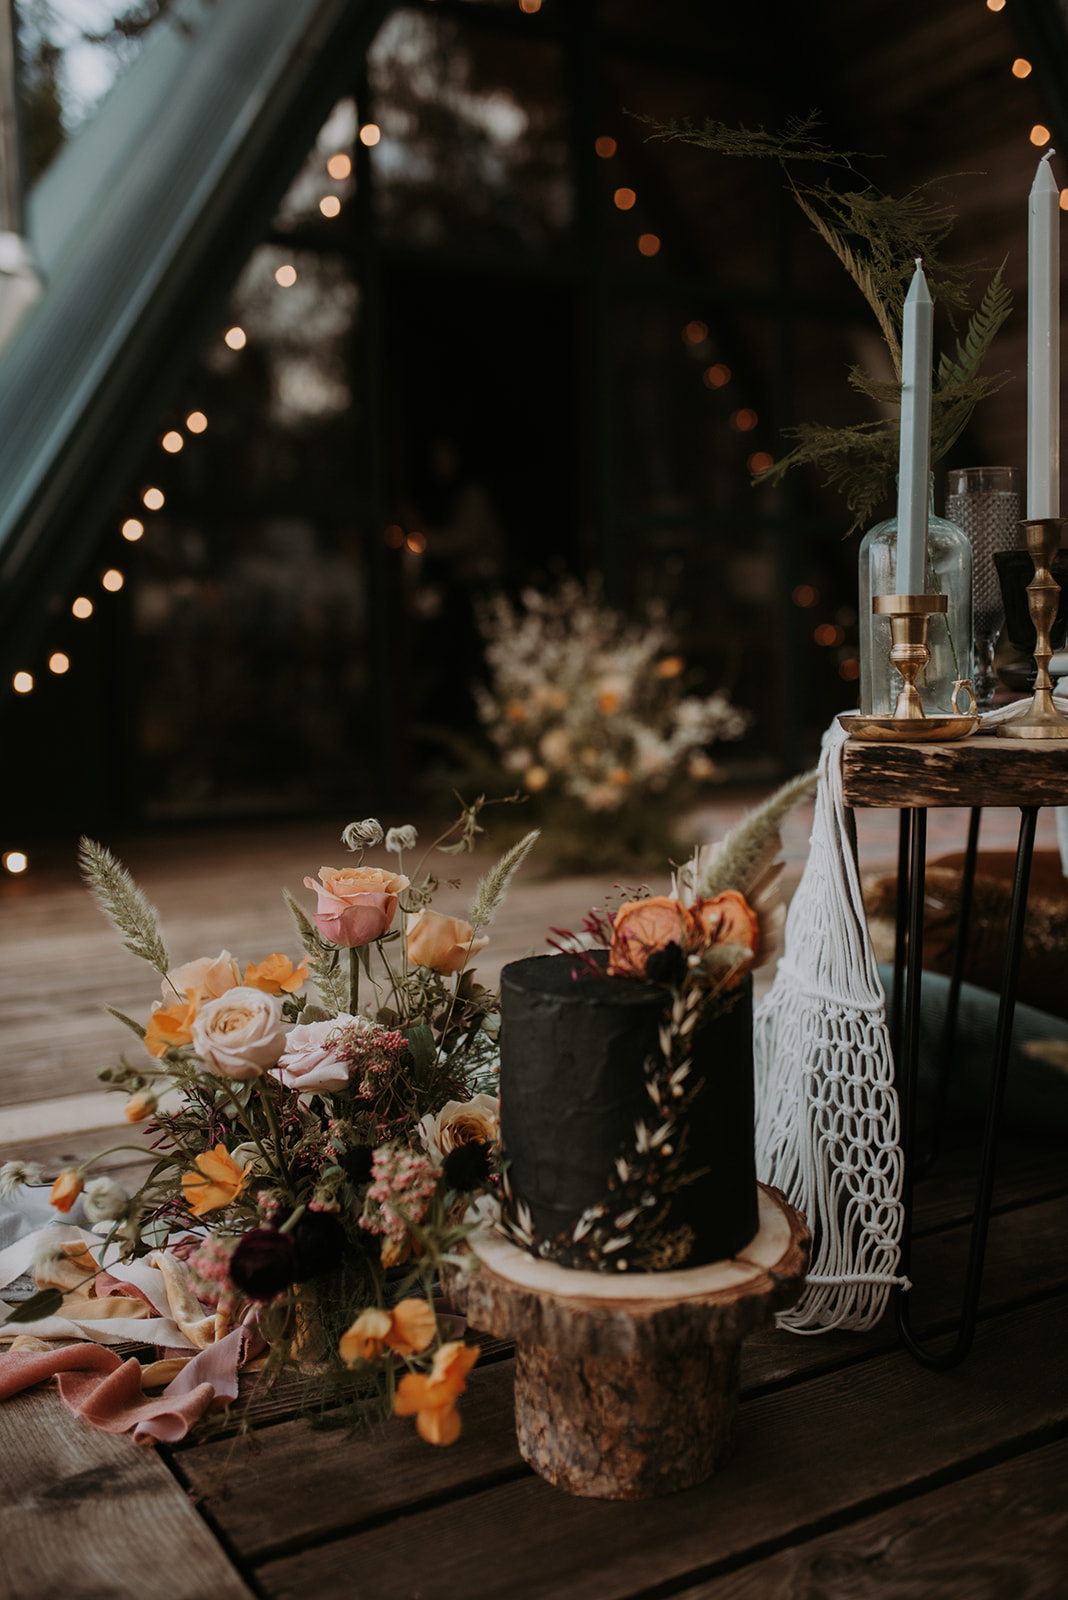 Mount Rainier elopement photographer captures intimate moment at cozy a-frame cabin, Woodsy wedding details, boho cake